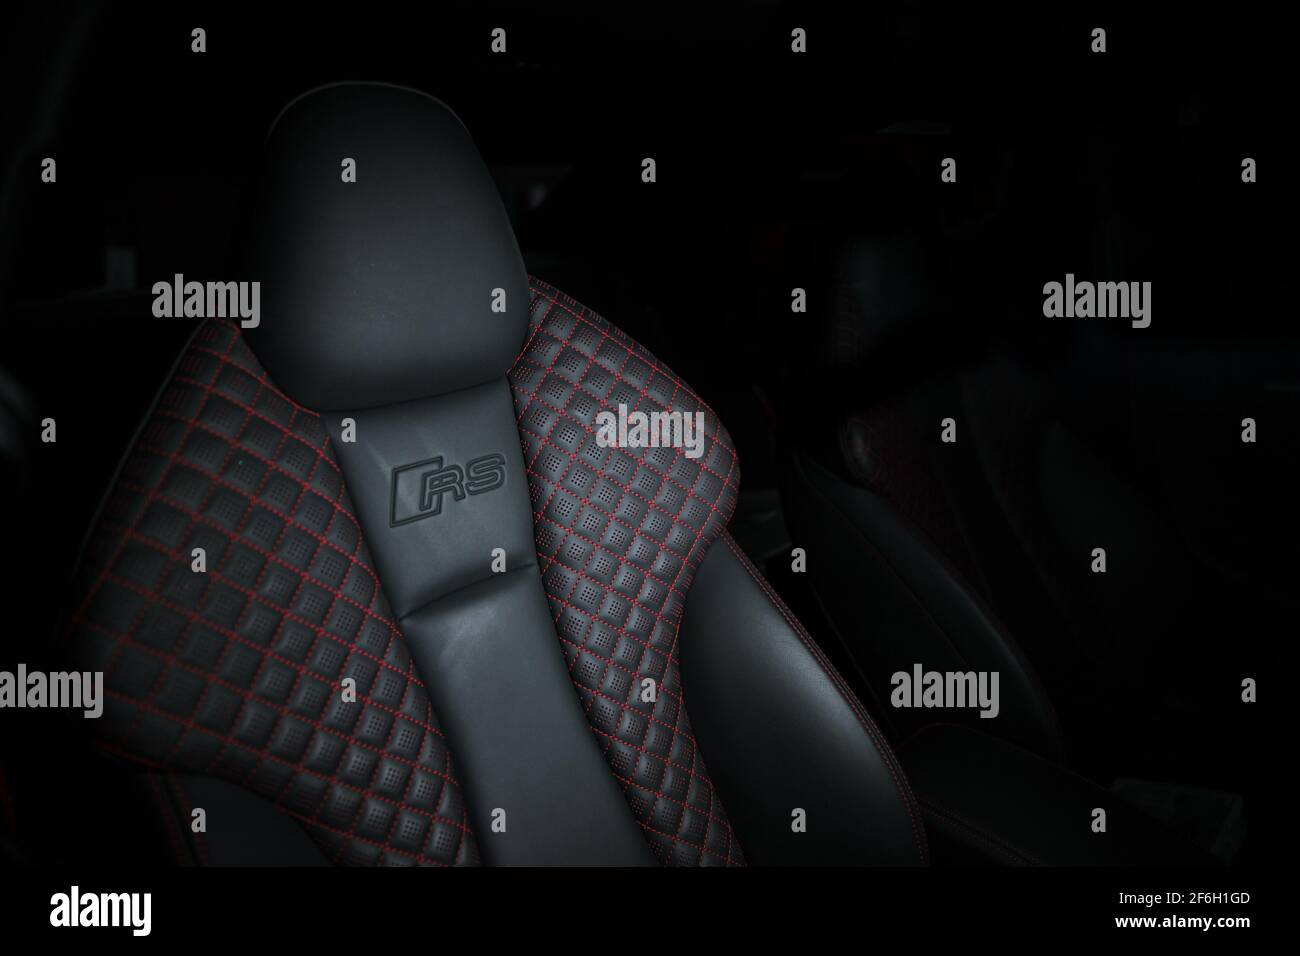 The Drivers Seat Of A 2017 Audi RS3 With Optional Red Diamond Pattern Stitching Stock Photo